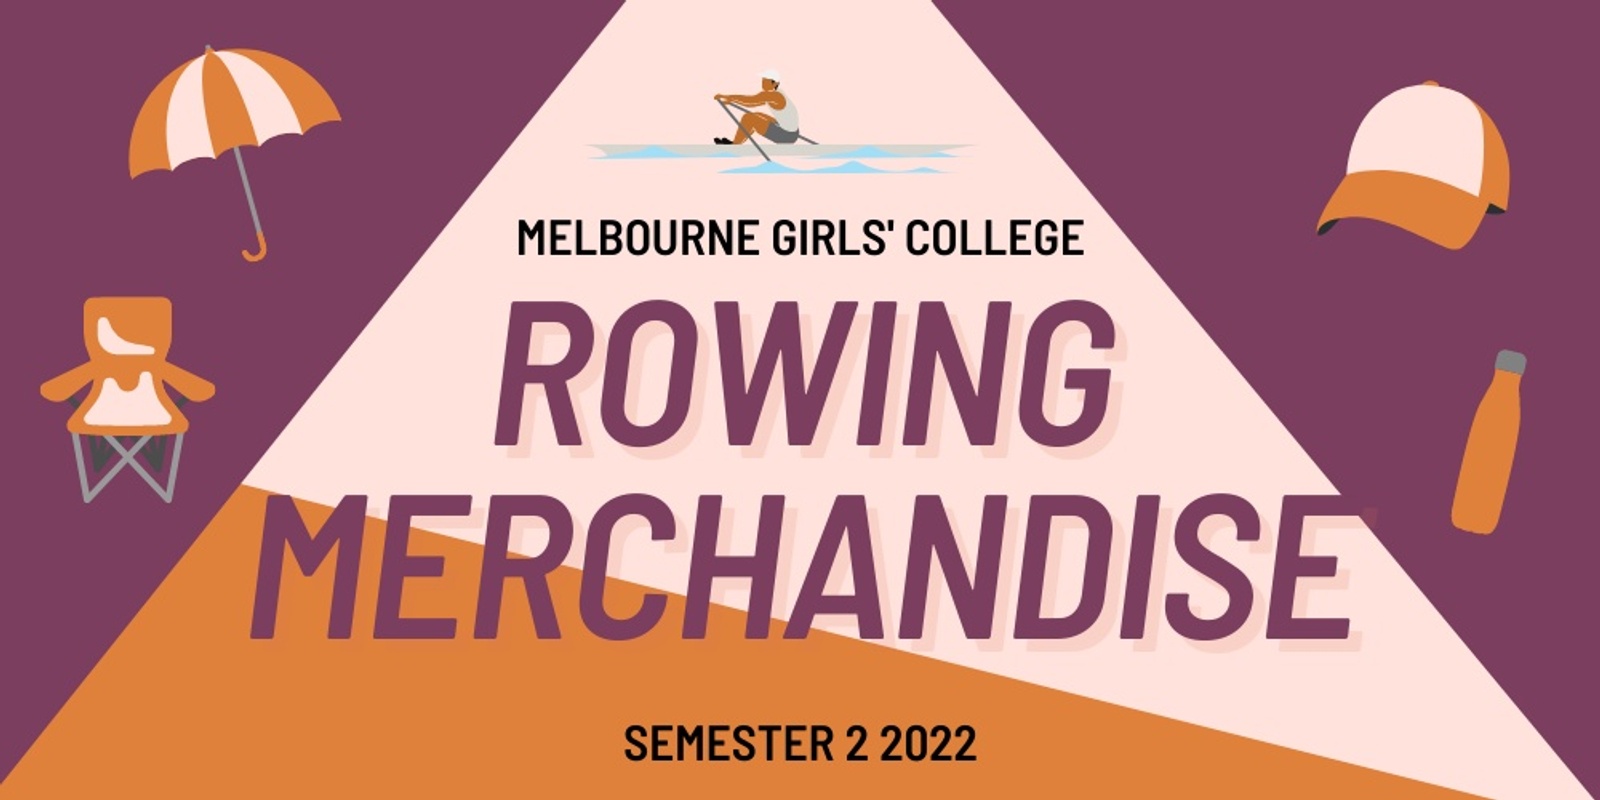 Banner image for Melbourne Girls' College Rowing Merchandise - Semester 2 2022